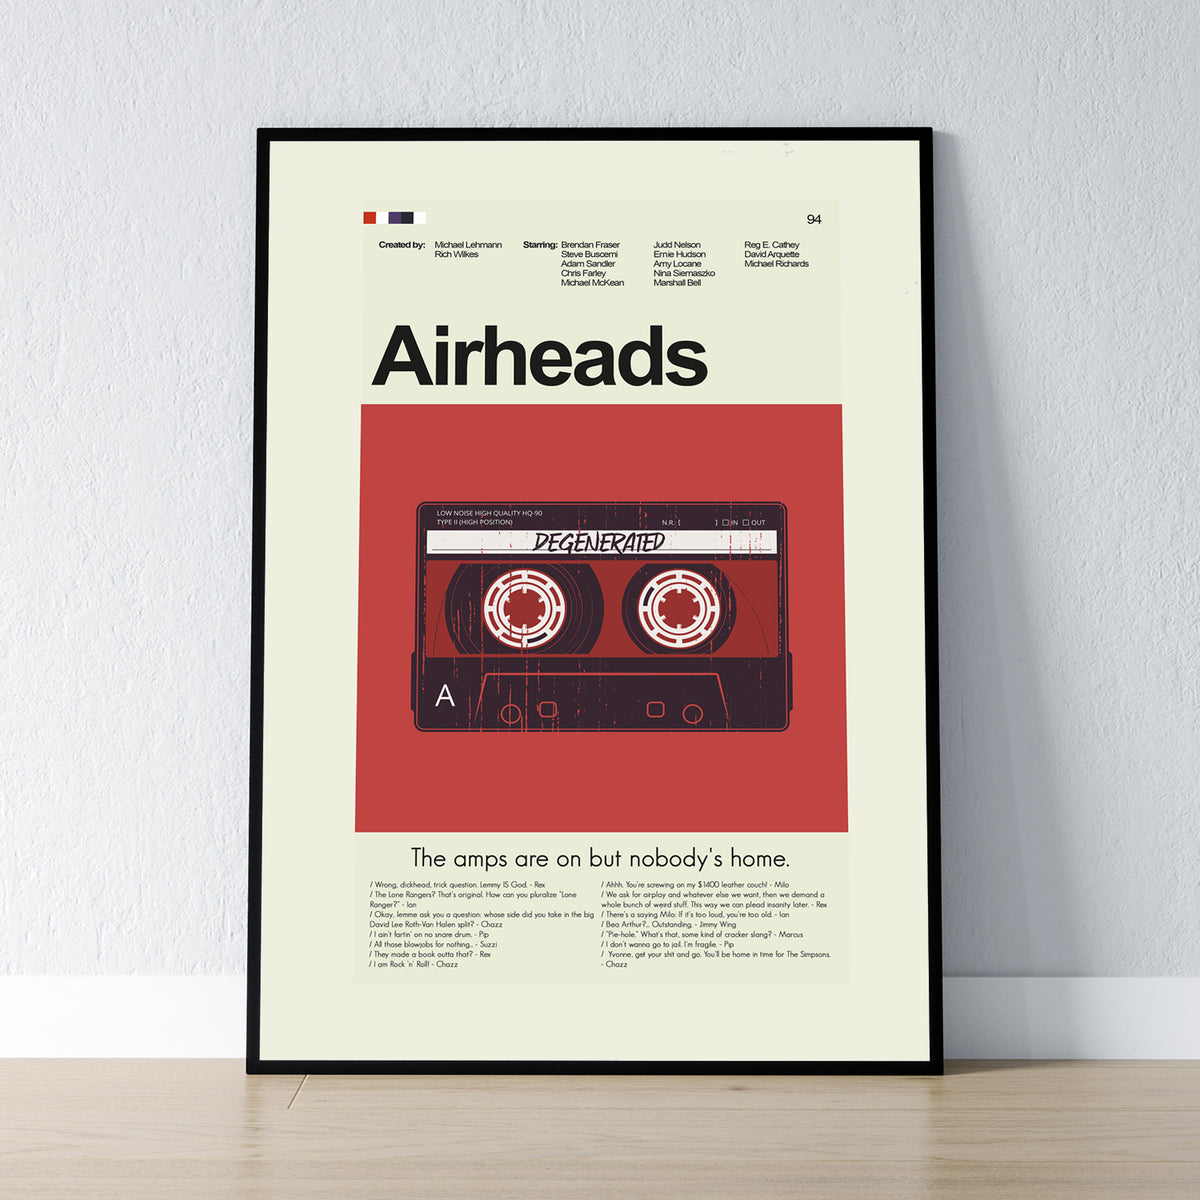 Airheads - Degenerated Tape  | 12"x18" or 18"x24" Print only